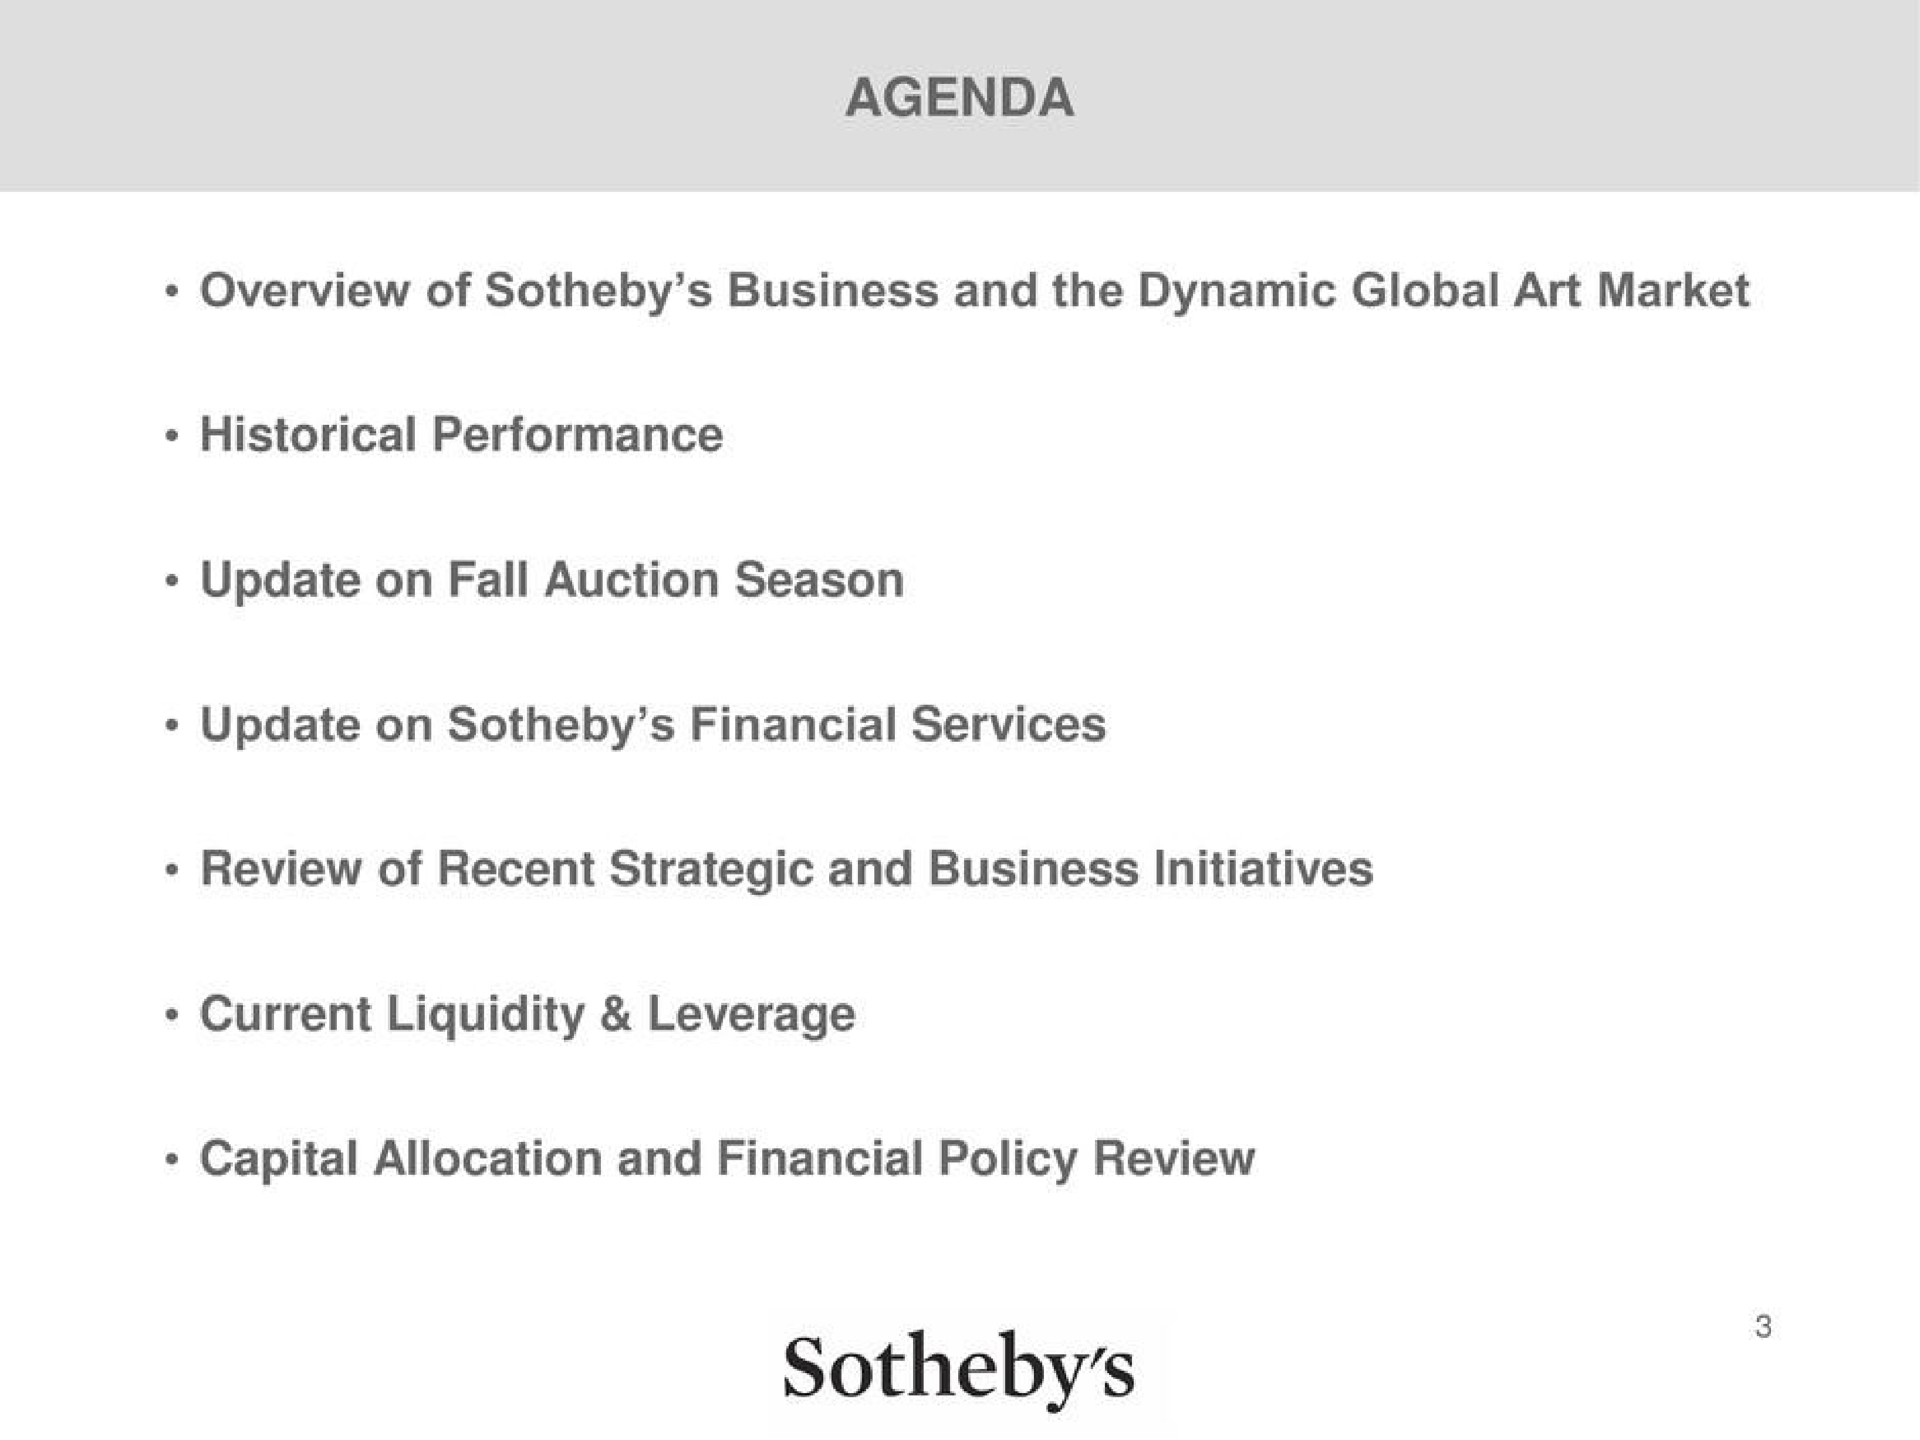 agenda overview of business and the dynamic global art market historical performance update on fall auction season update on financial services review of recent strategic and business initiatives current liquidity leverage capital allocation and financial policy review | Sotheby's